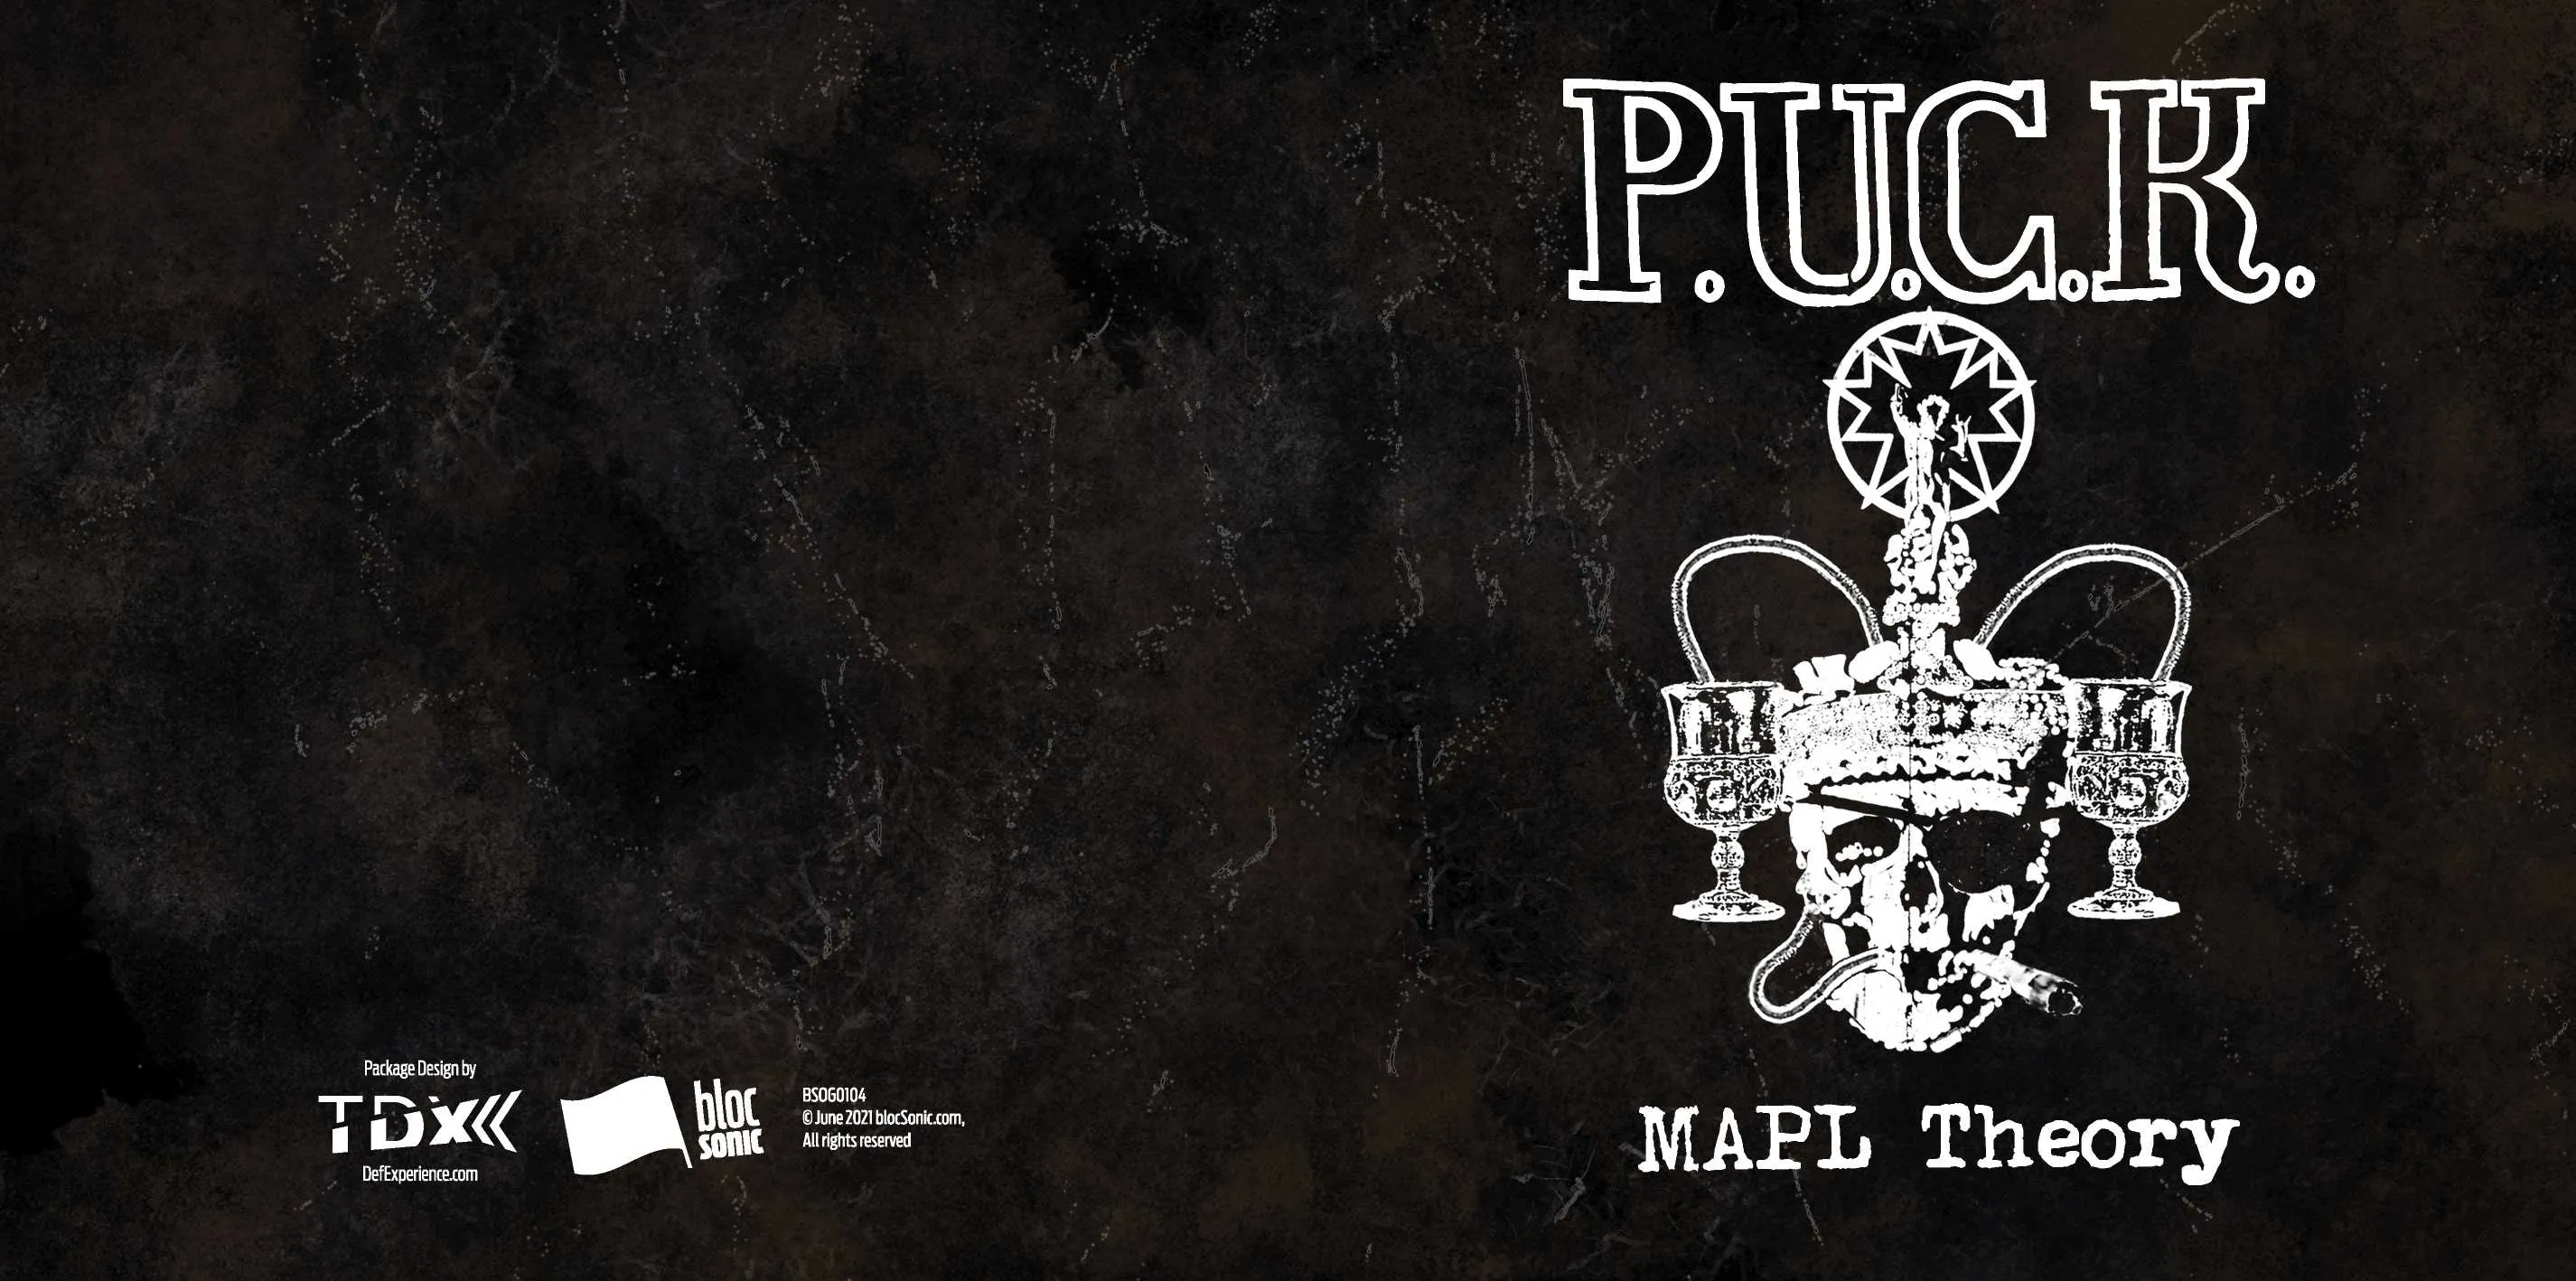 Album insert for “MAPL Theory” by P.U.C.K.